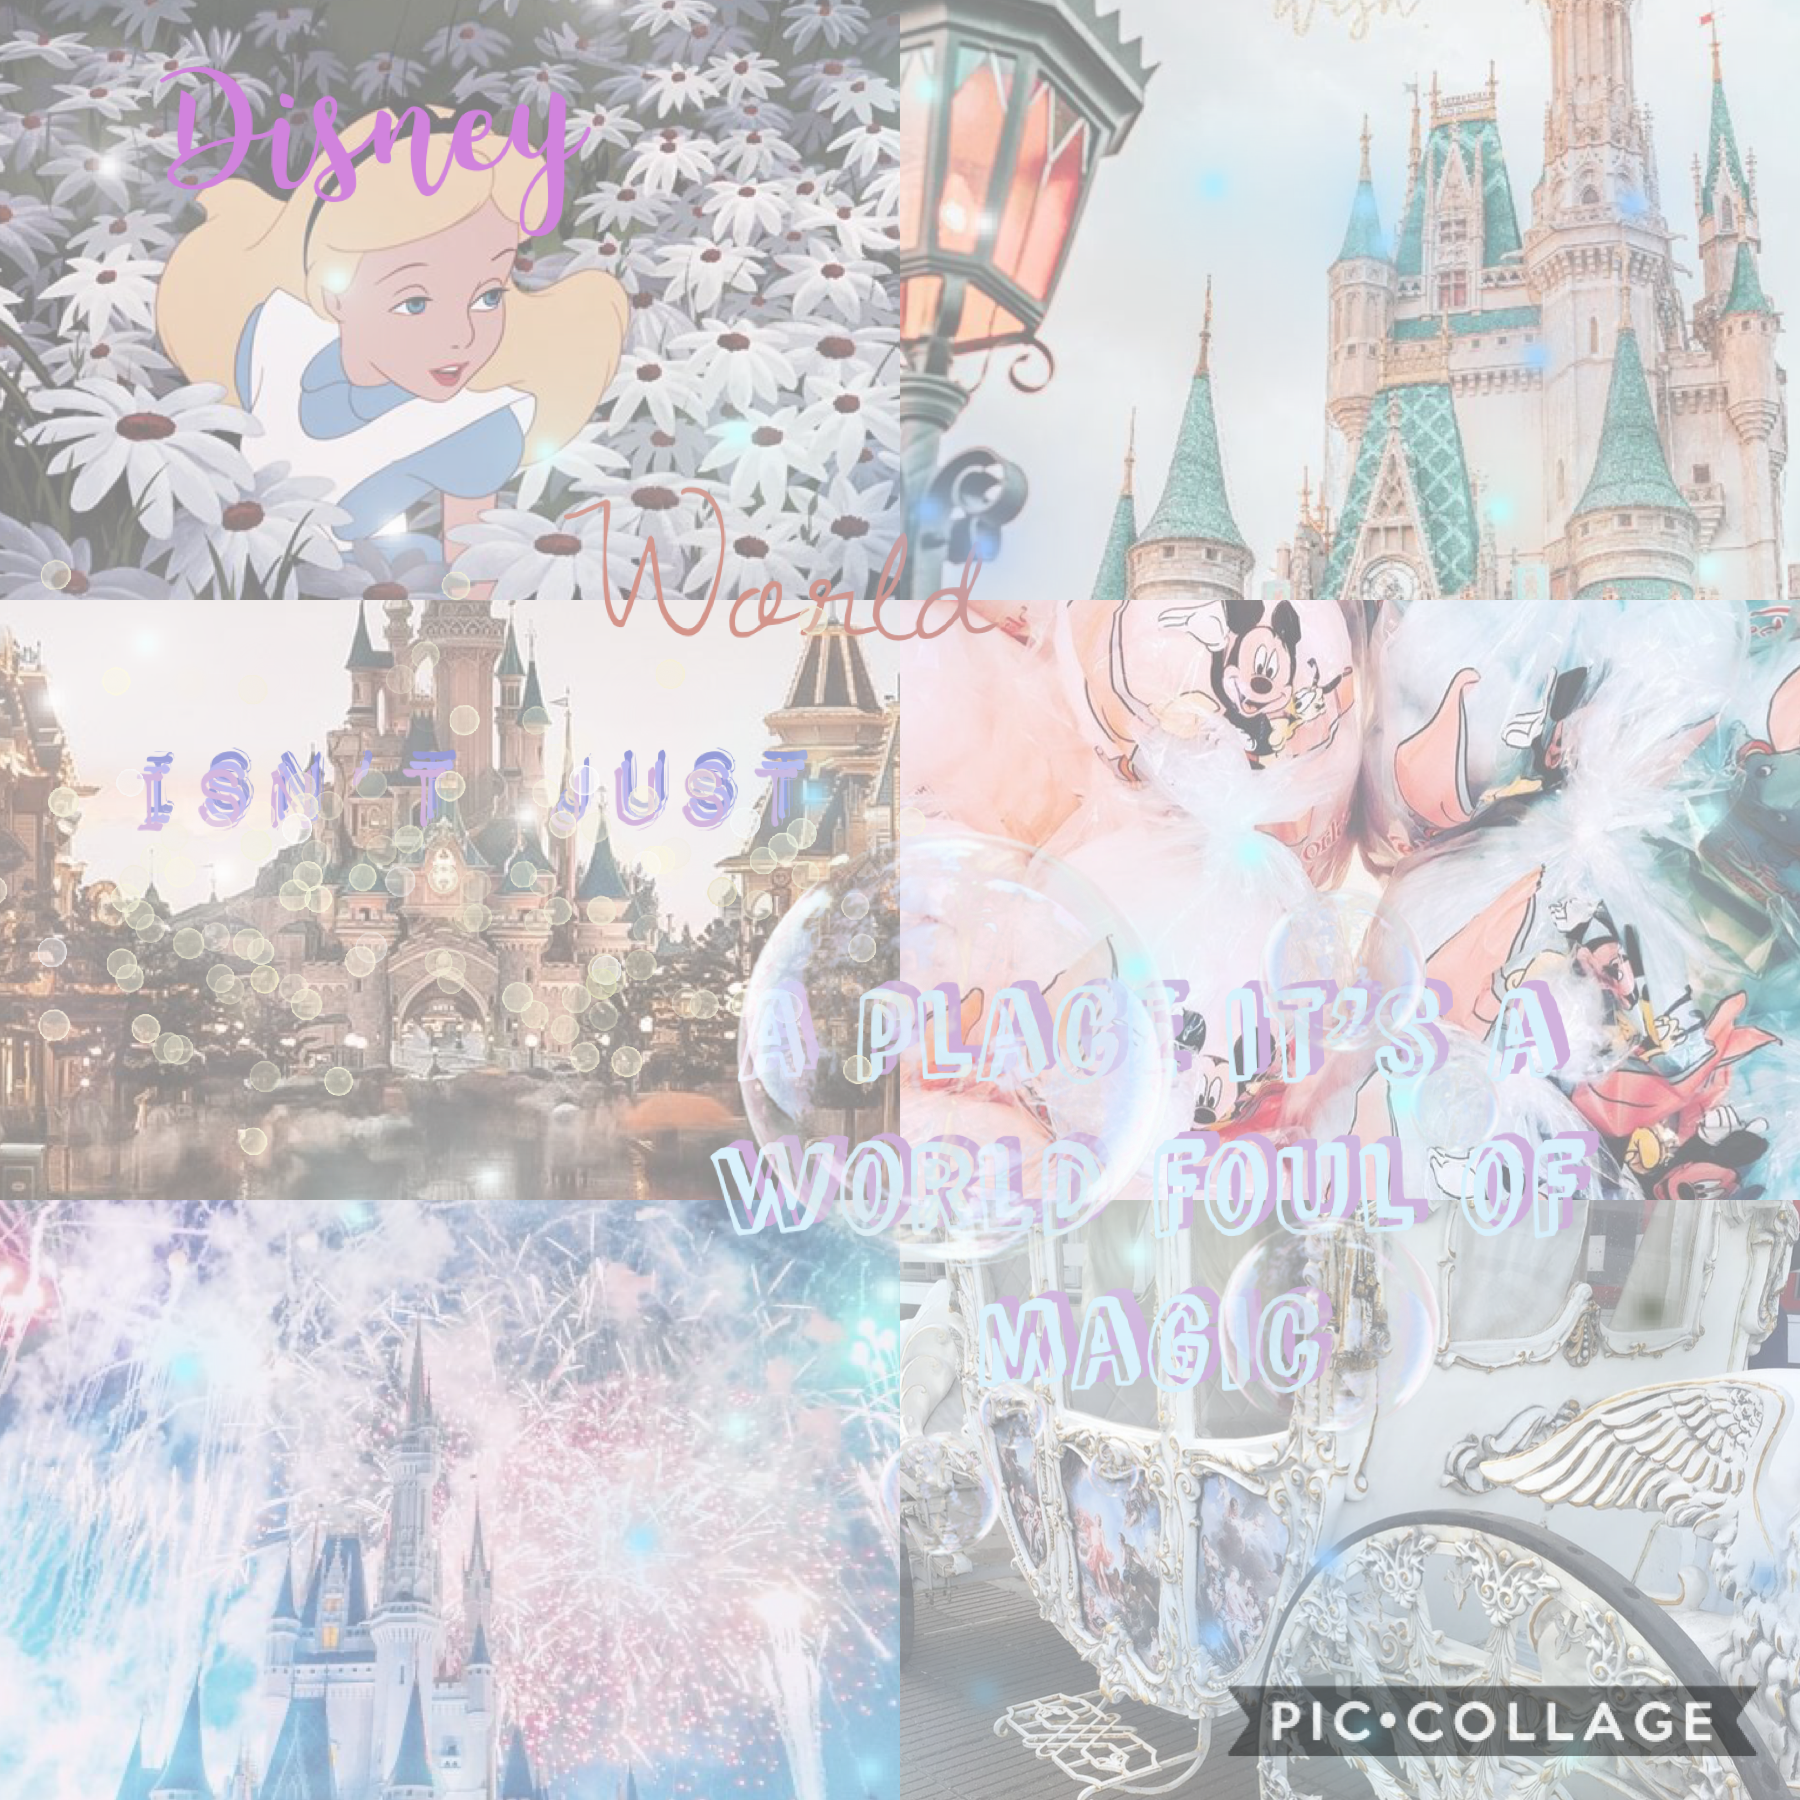 Collage by roxys-disney-acc